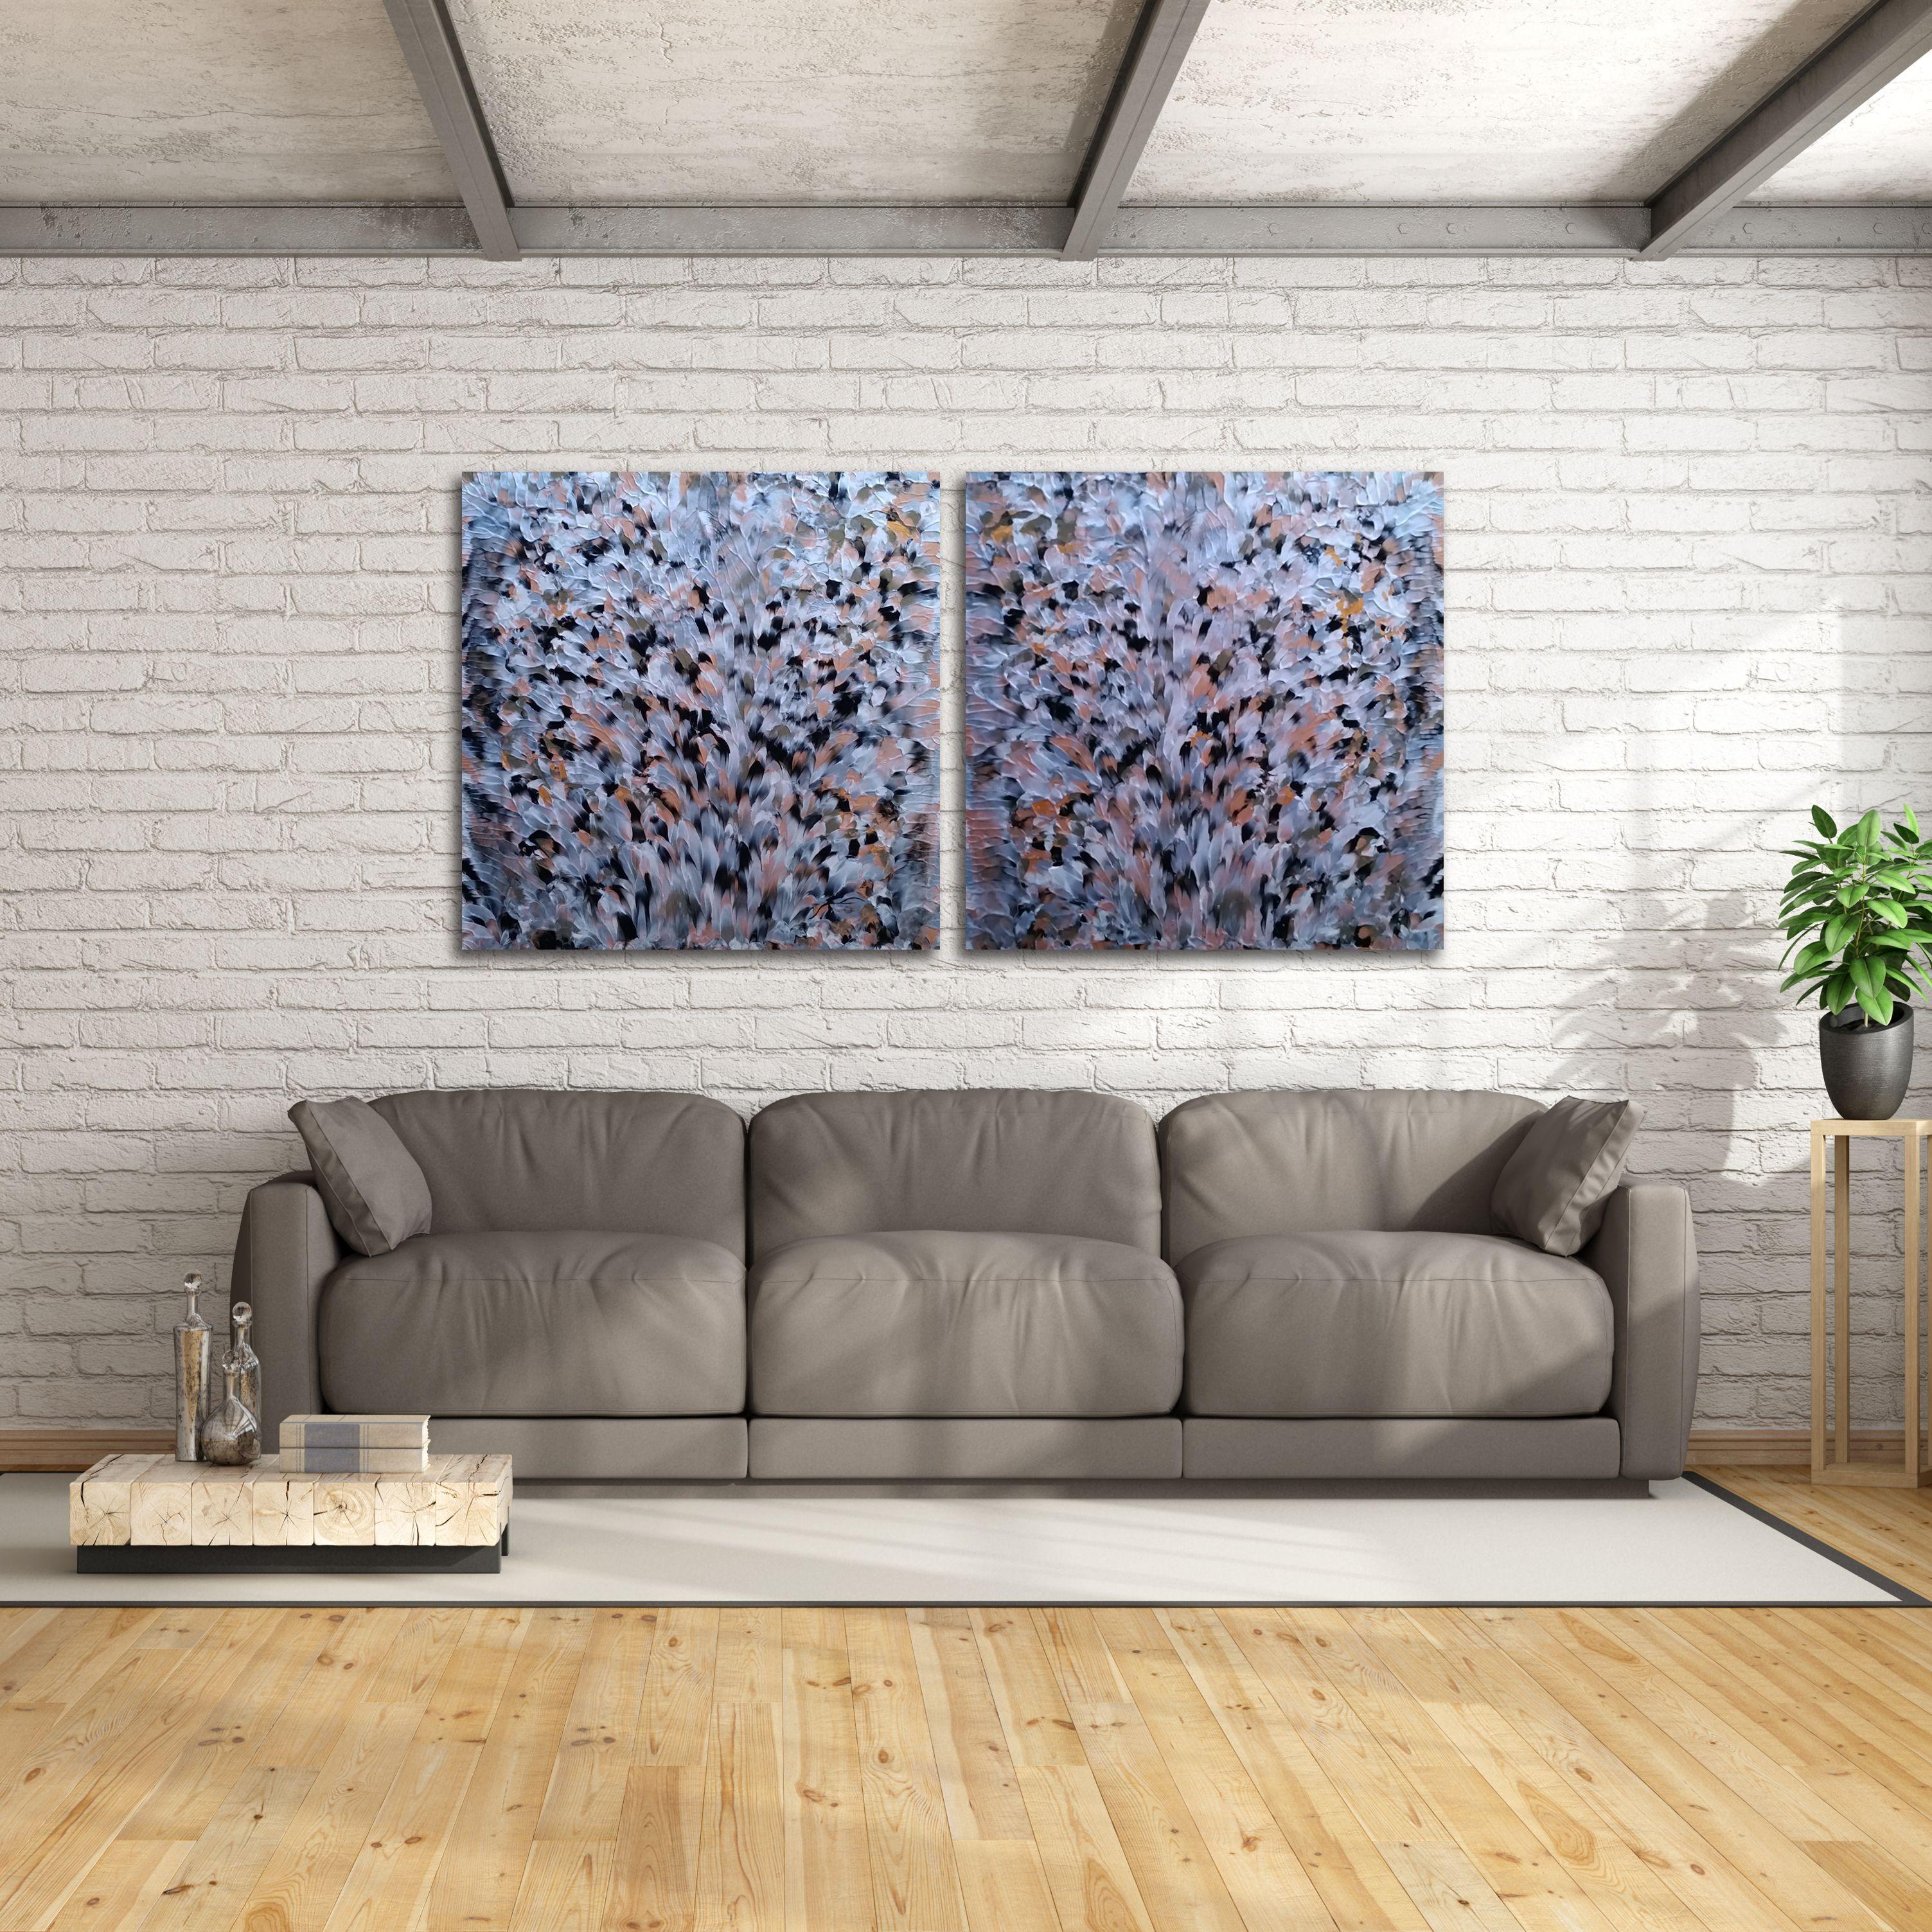 One-of-a-kind, contemporary abstract expressionism painting features a metallic silver, copper, bronze, and iridescent pearl with a high-gloss finish that gives the work a wet look and emphasizes its bold and unique texture that looks like whimsical